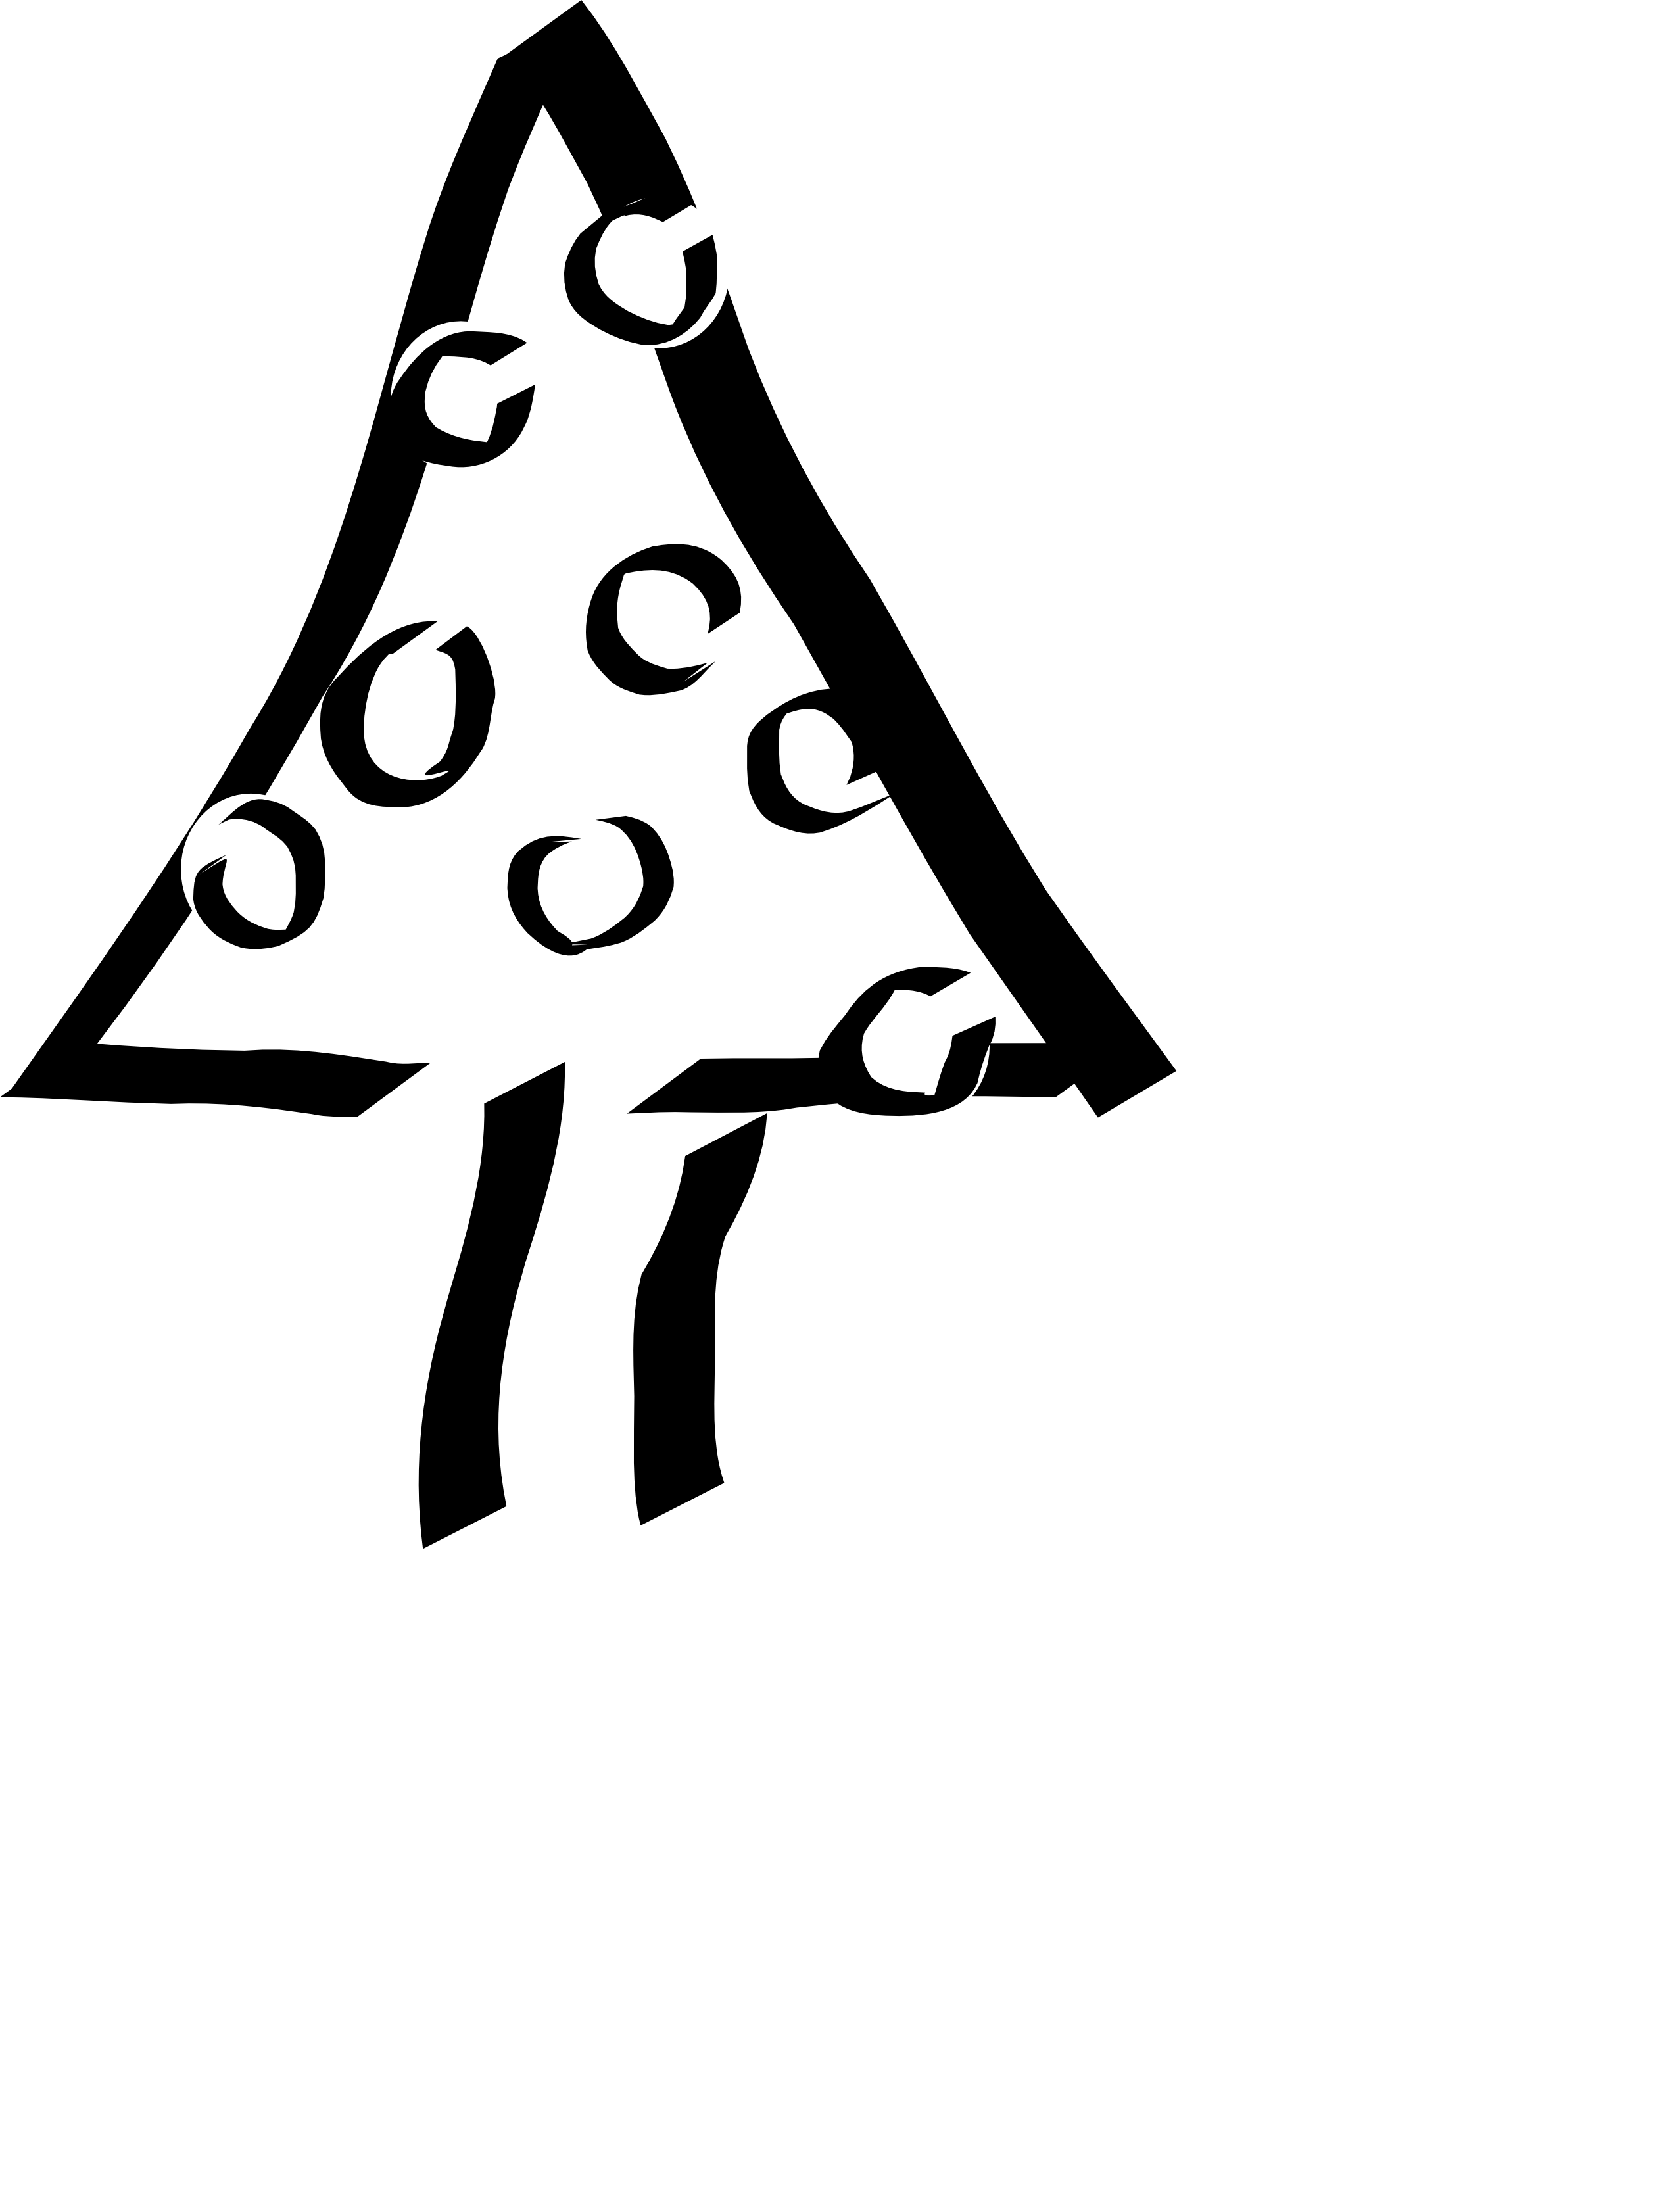 Christmas tree  black and white tree clipart black and white clipart